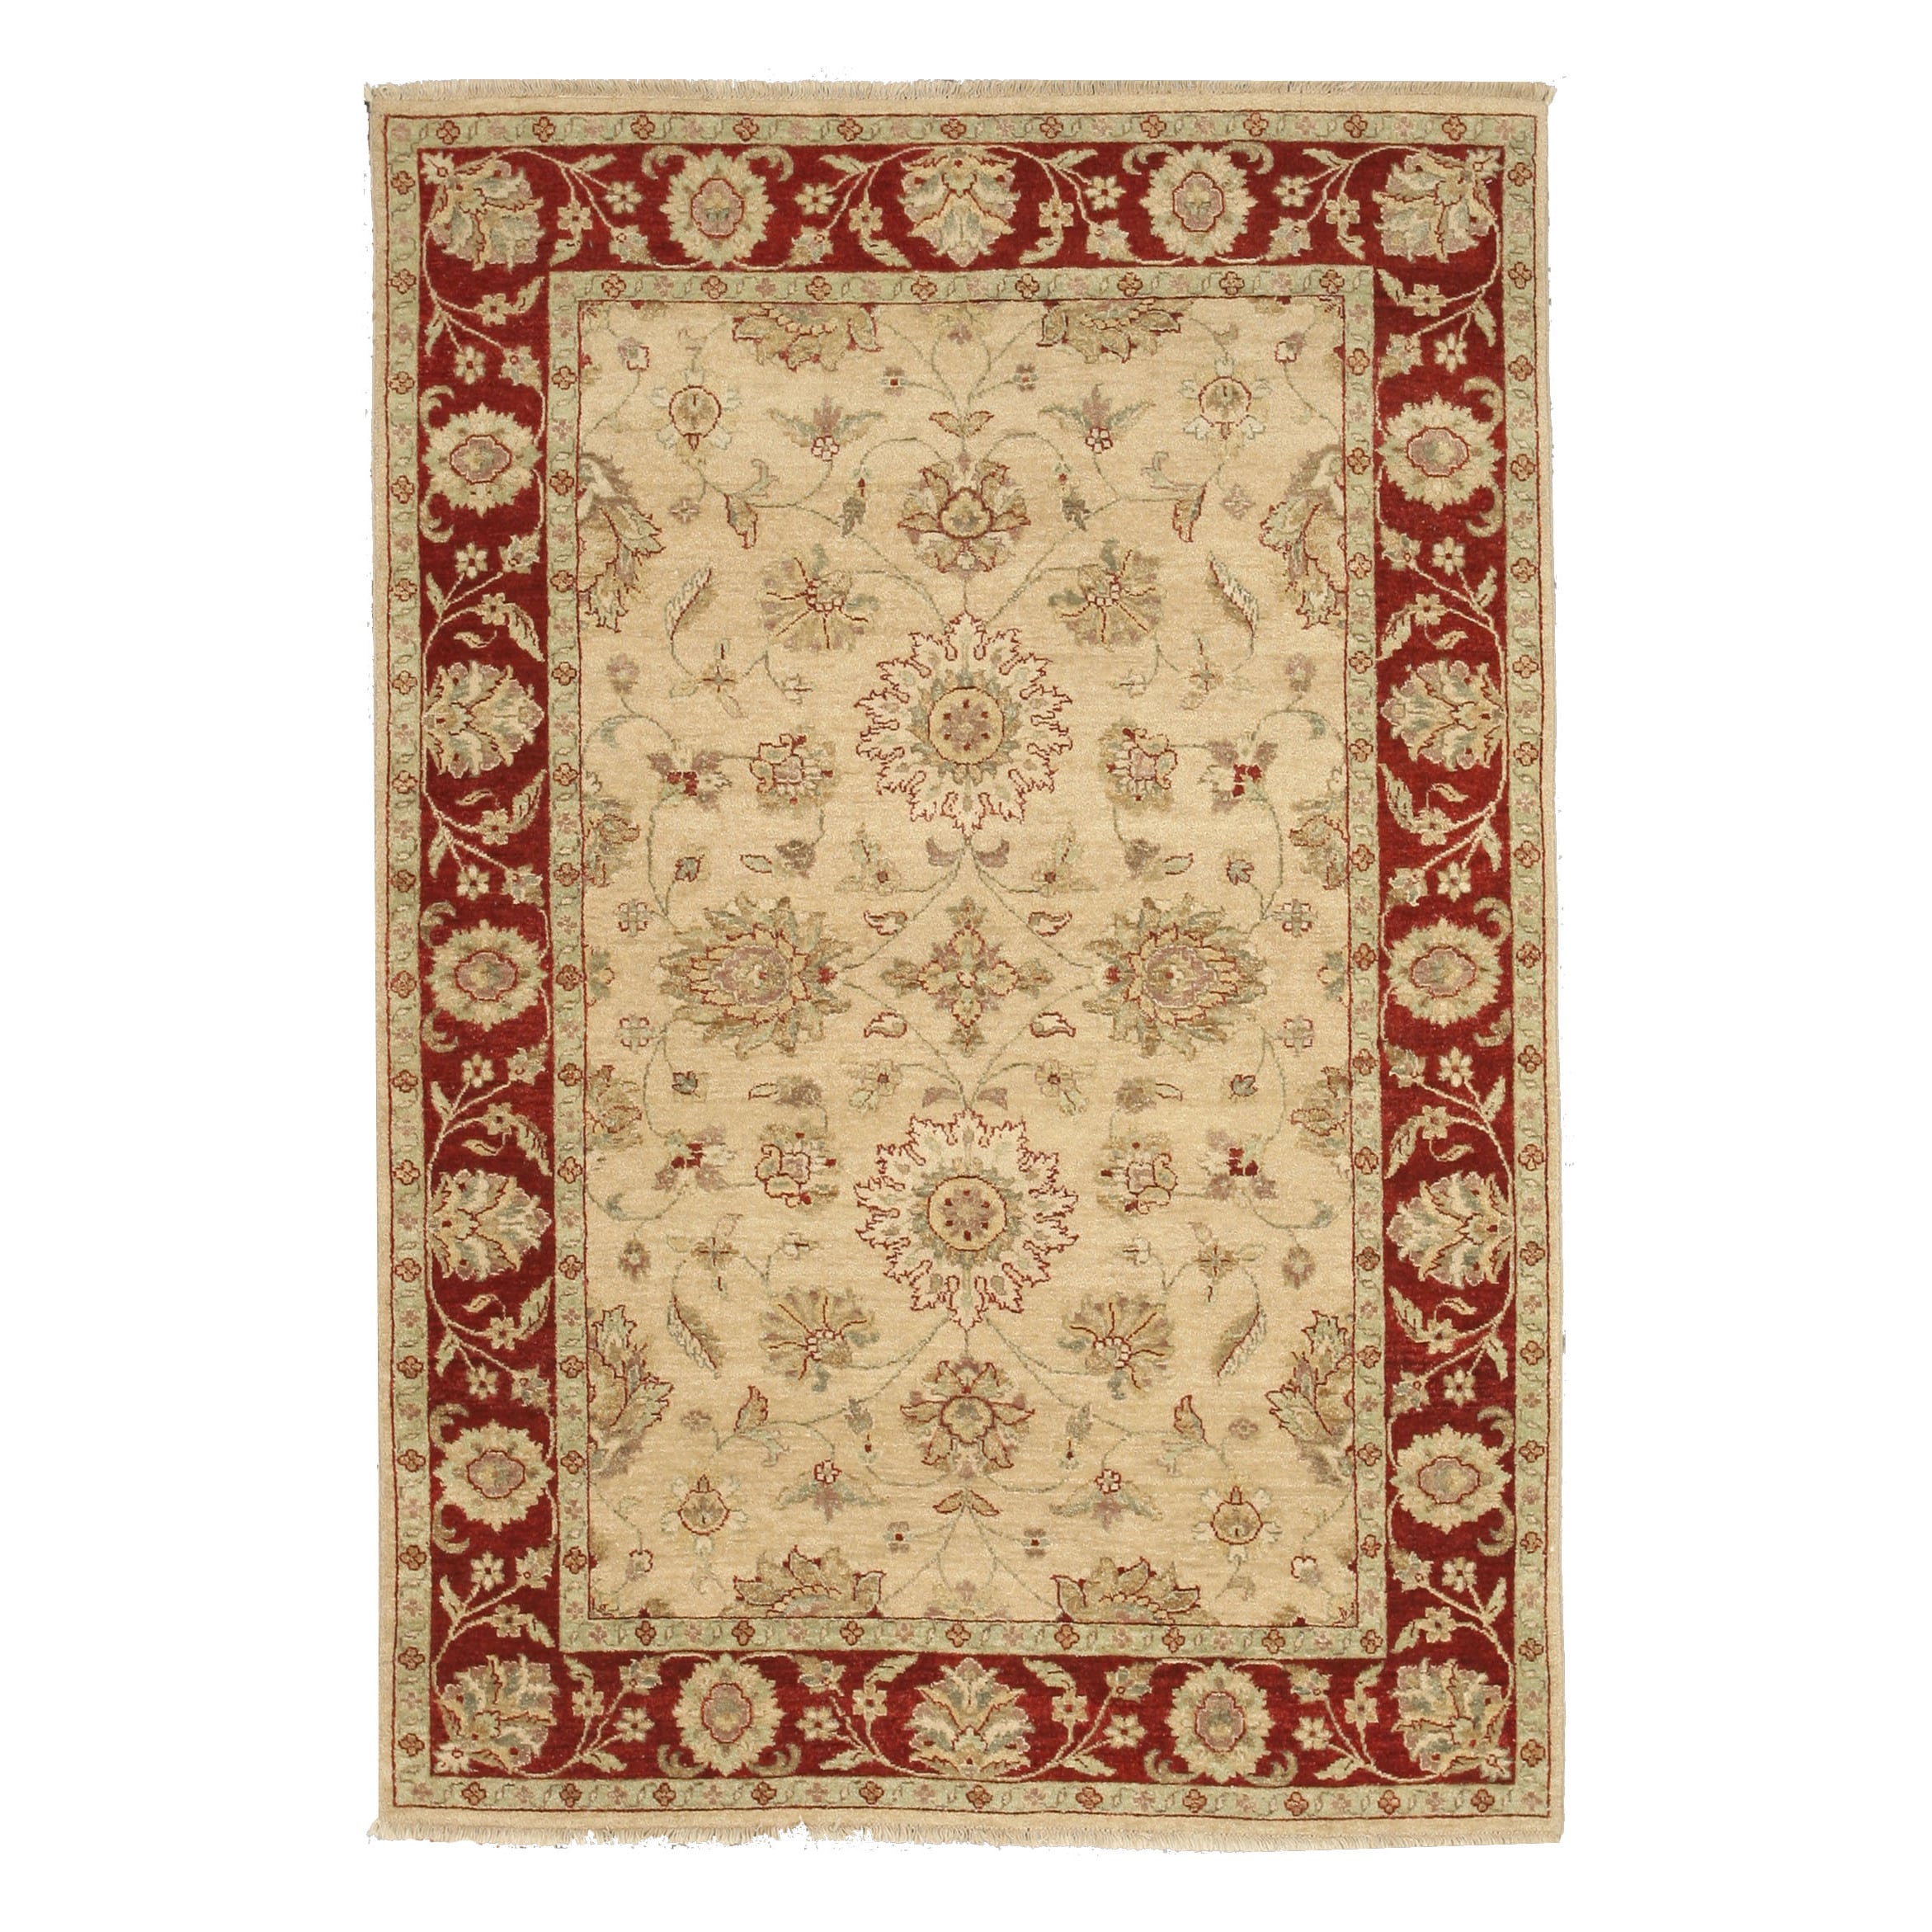 Living Room Bedroom Kitchen Decorative Unique Lightweight Printed Rugs ALAZA My Daily Snowflake Merry Christmas Area Rug 2 x 3 Feet 